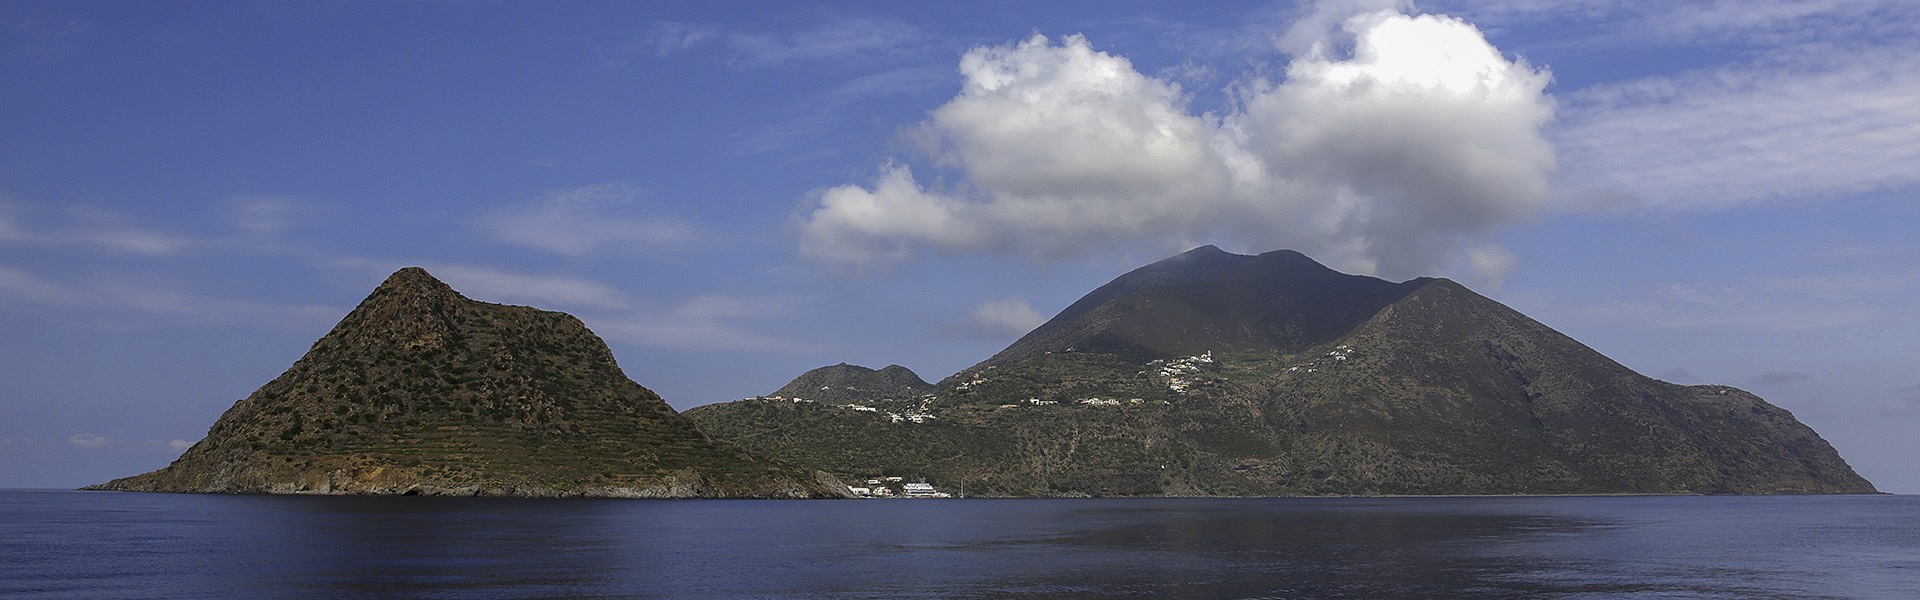 Isole Eolie 2